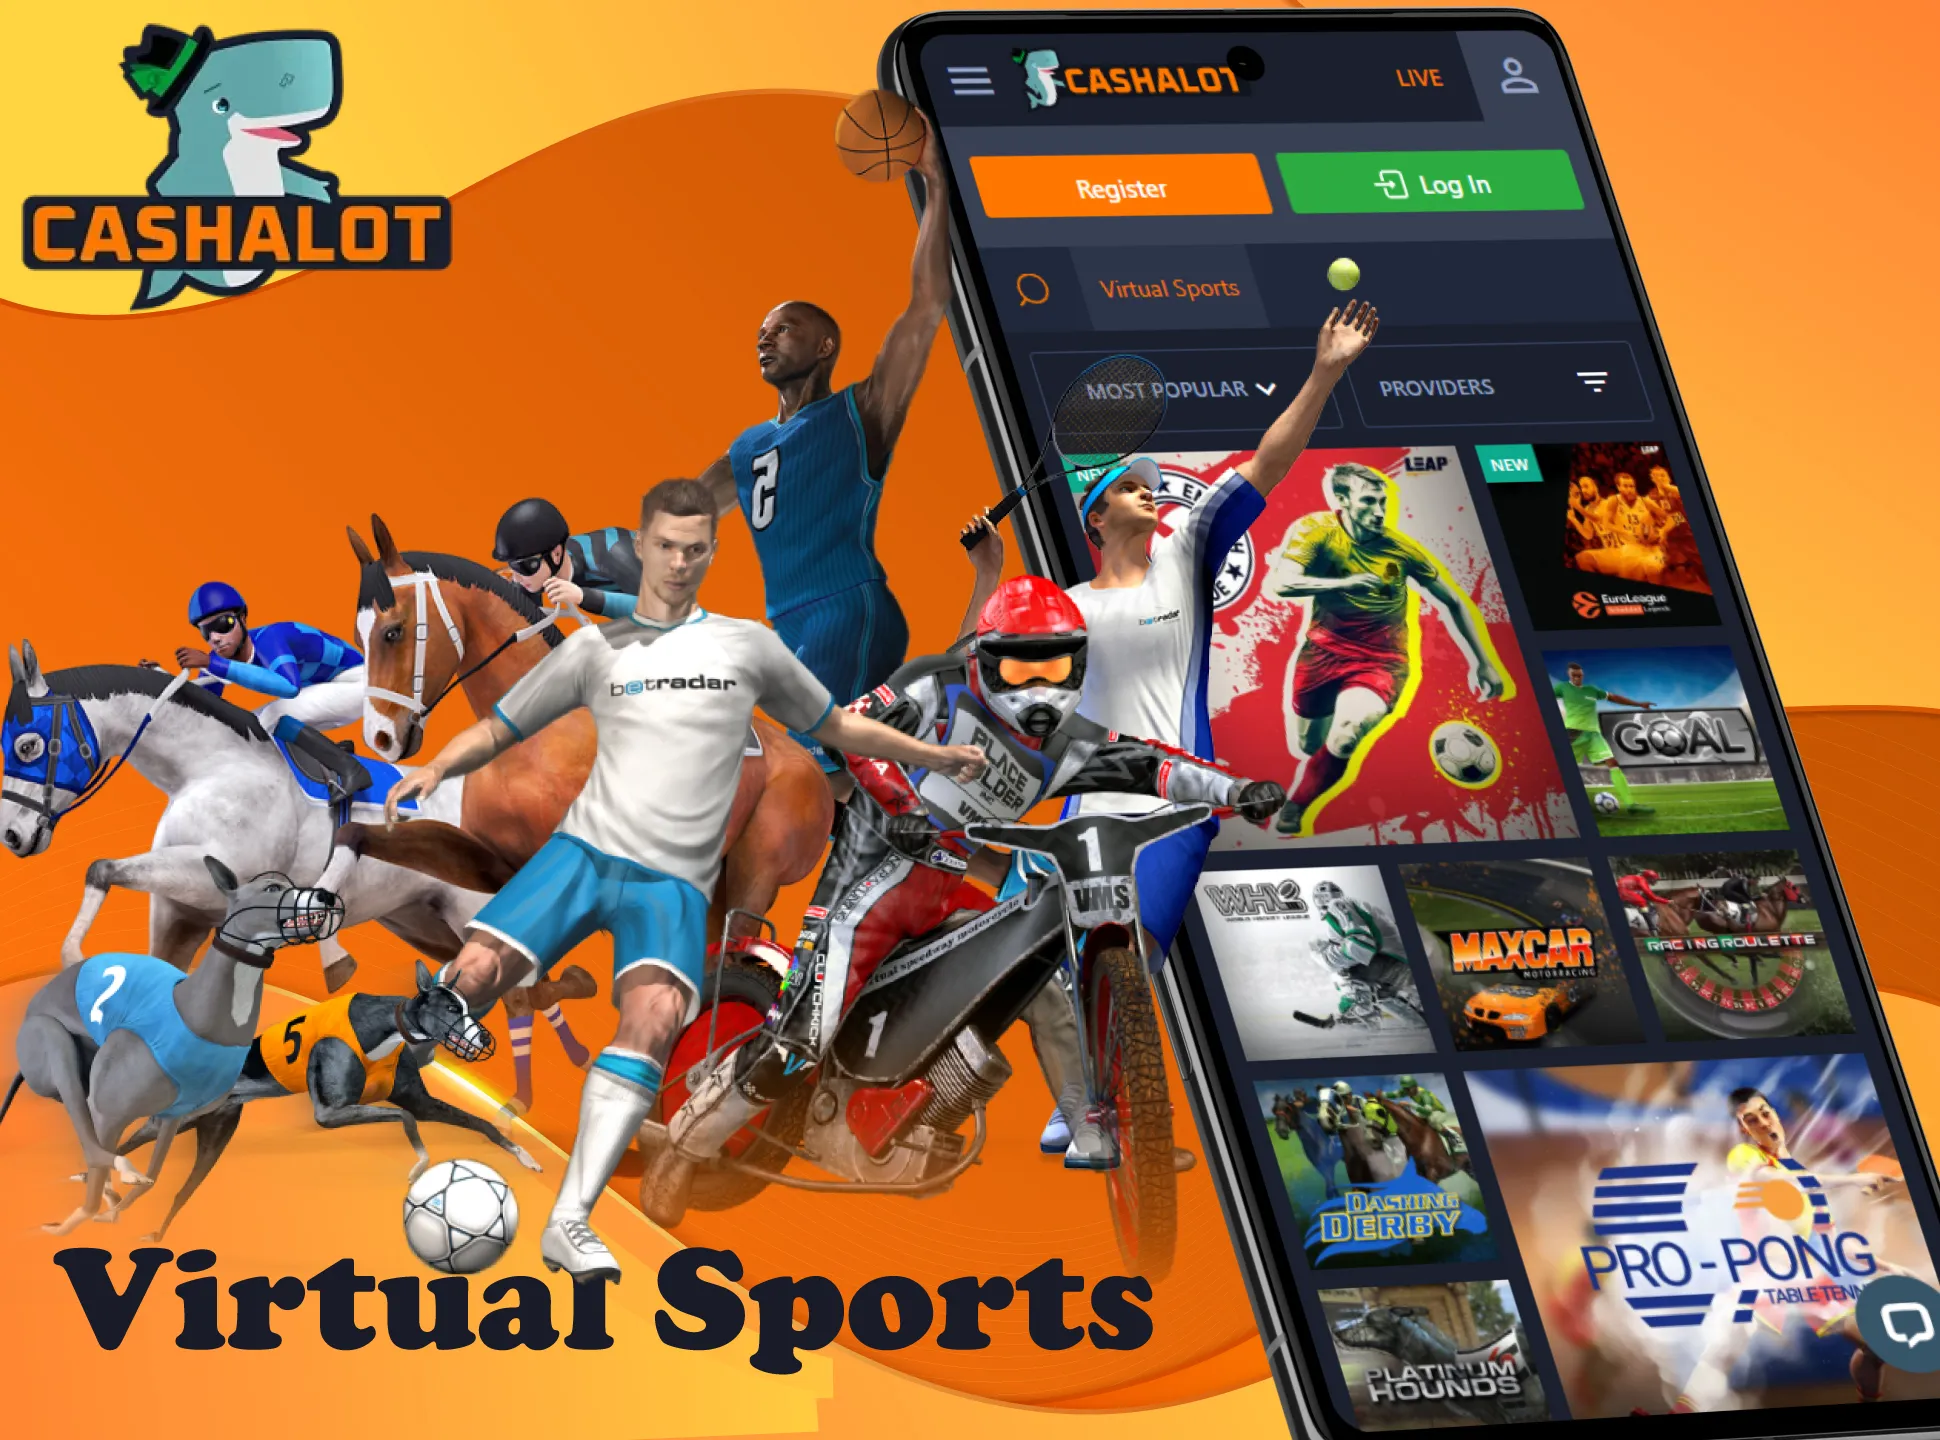 Bet on different virtual sports in the Cashalot app.